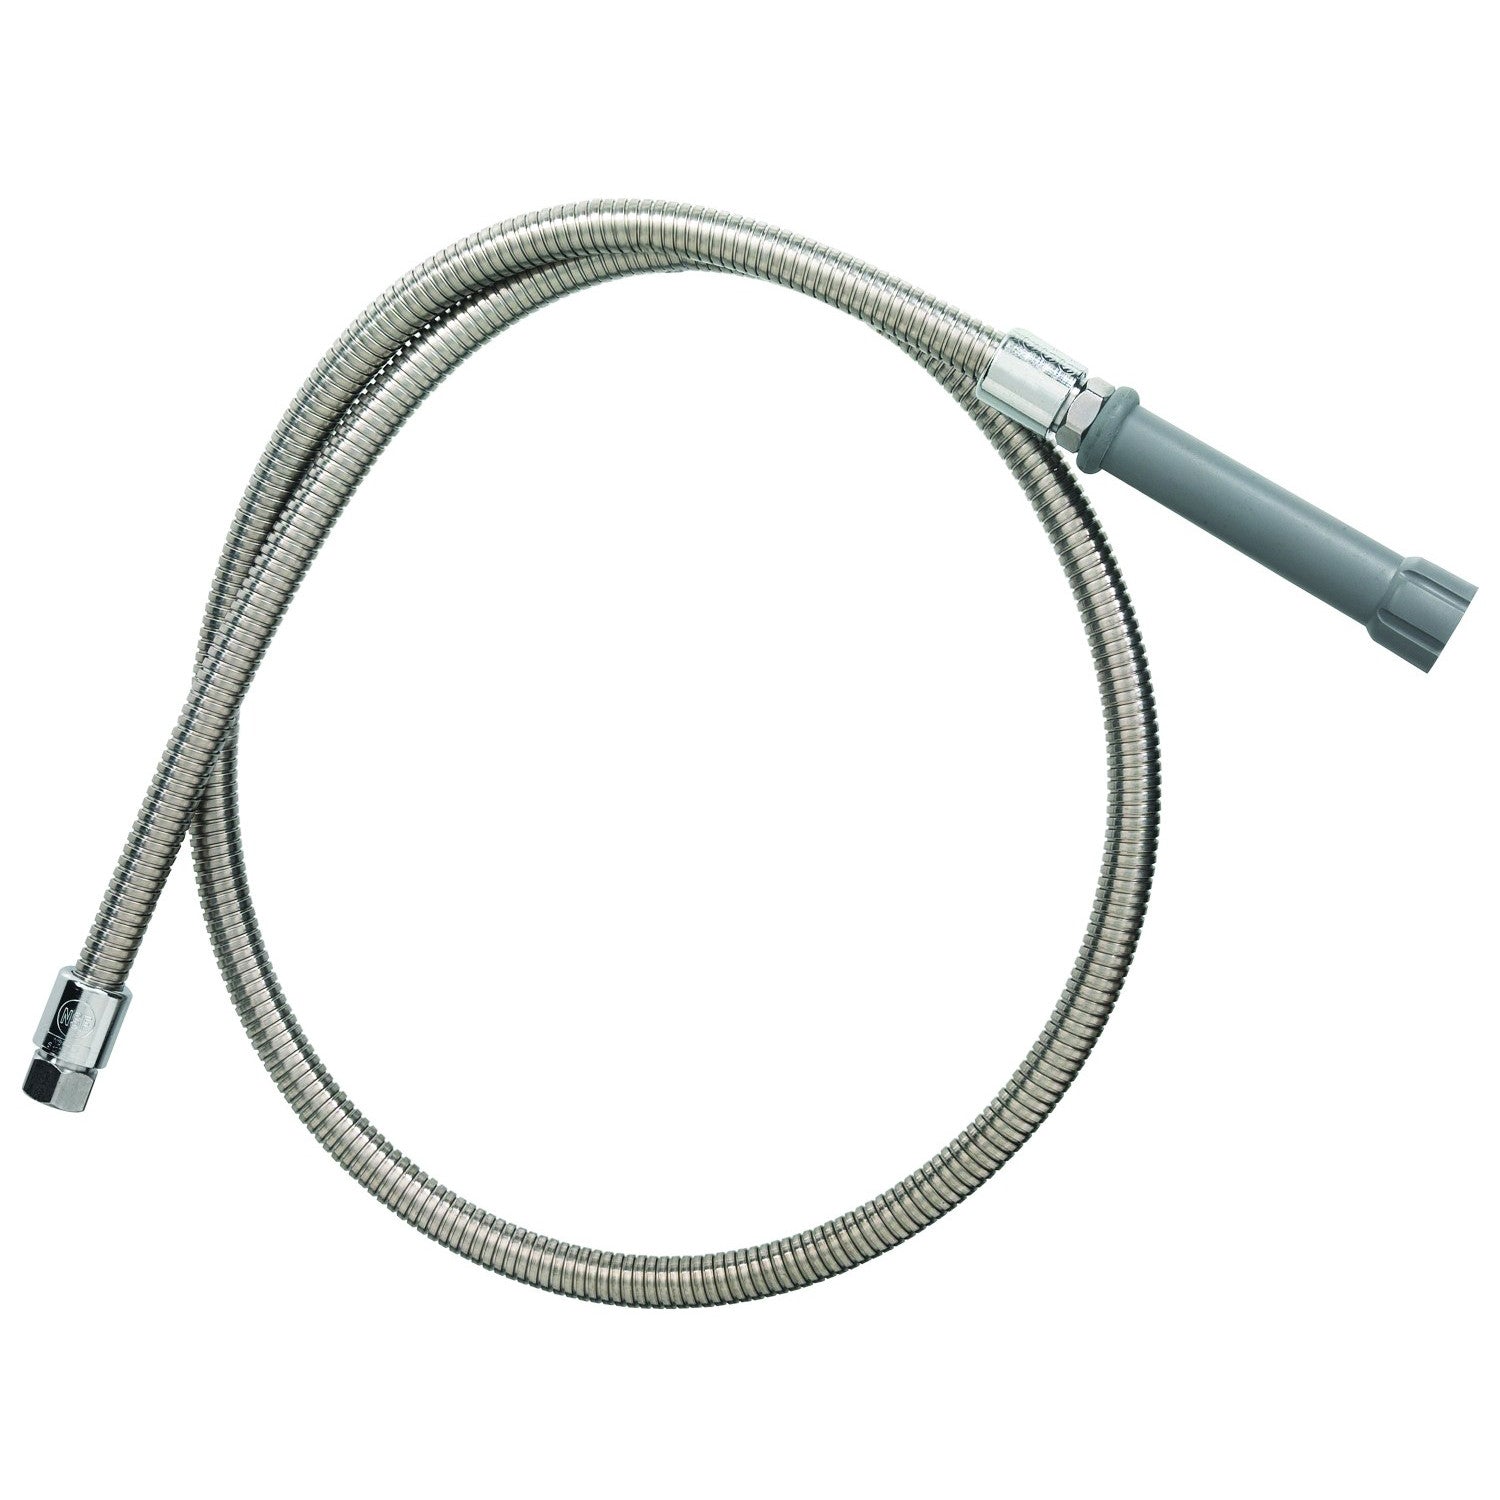 T&S Brass Hose, 50" Flexible Stainless Steel, Gray Handle - B